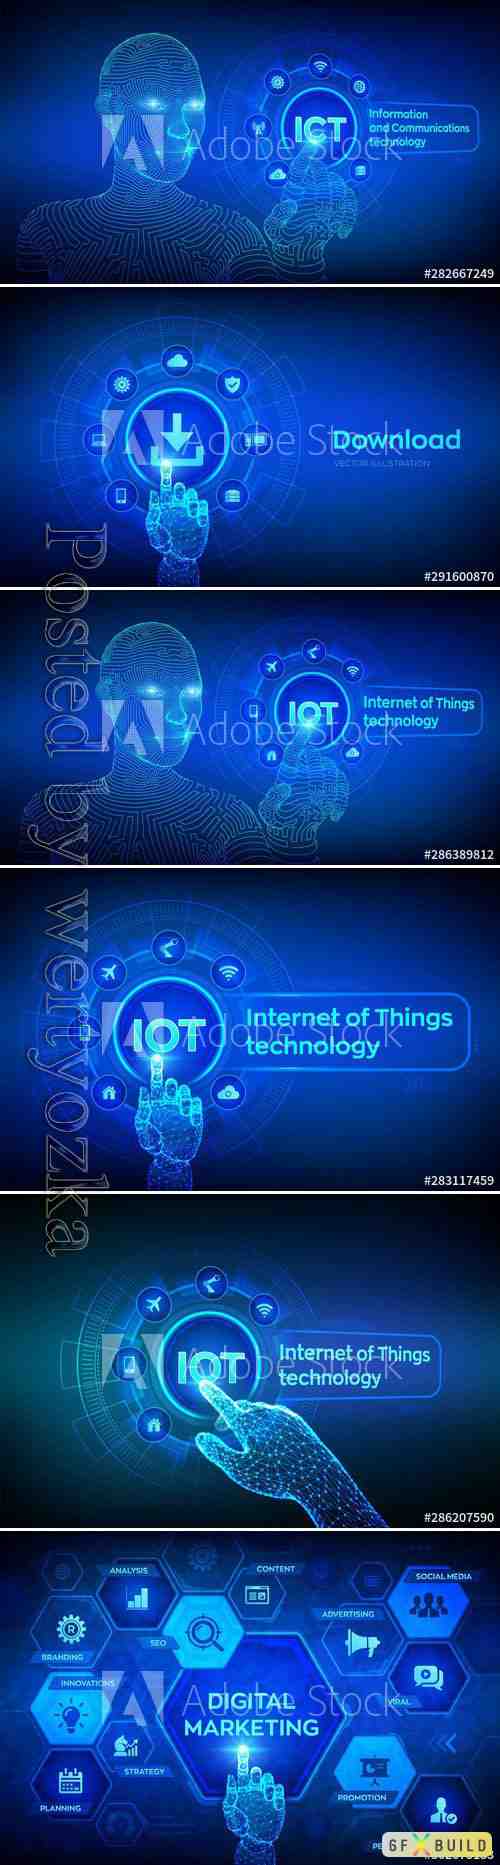 Internet of things technology concept on virtual screen